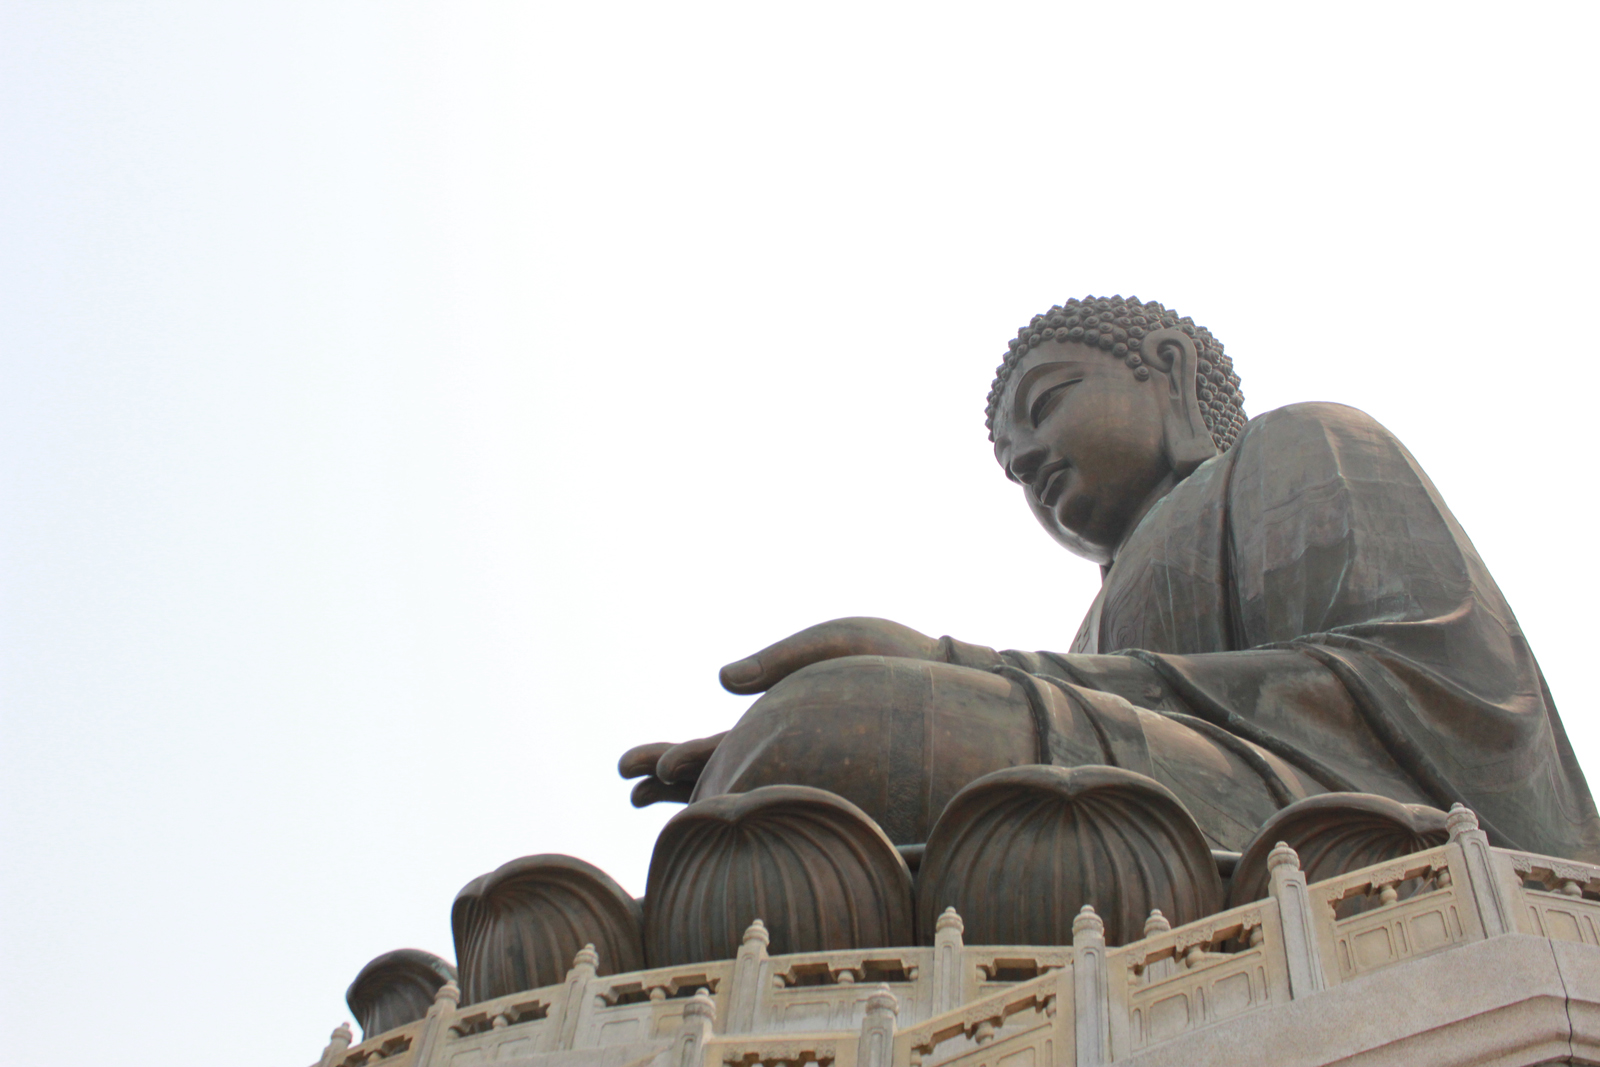 Here's a favorite of mine from the side of the Buddha statue.